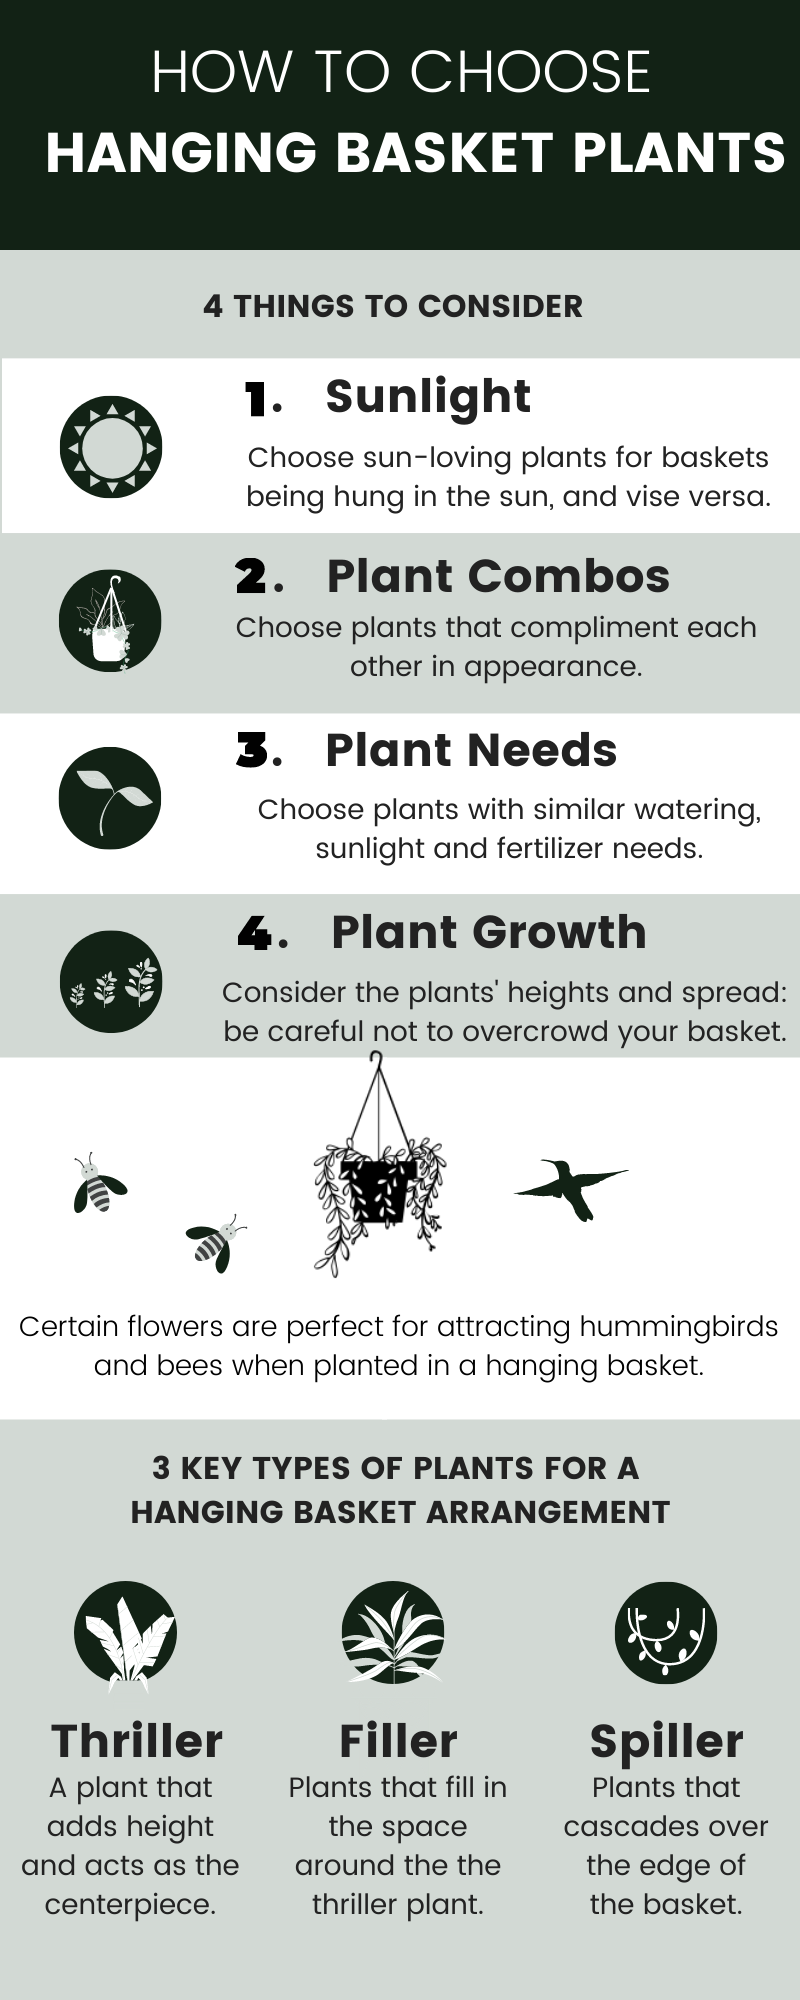 How to Choose Hanging Basket Plants Infographic